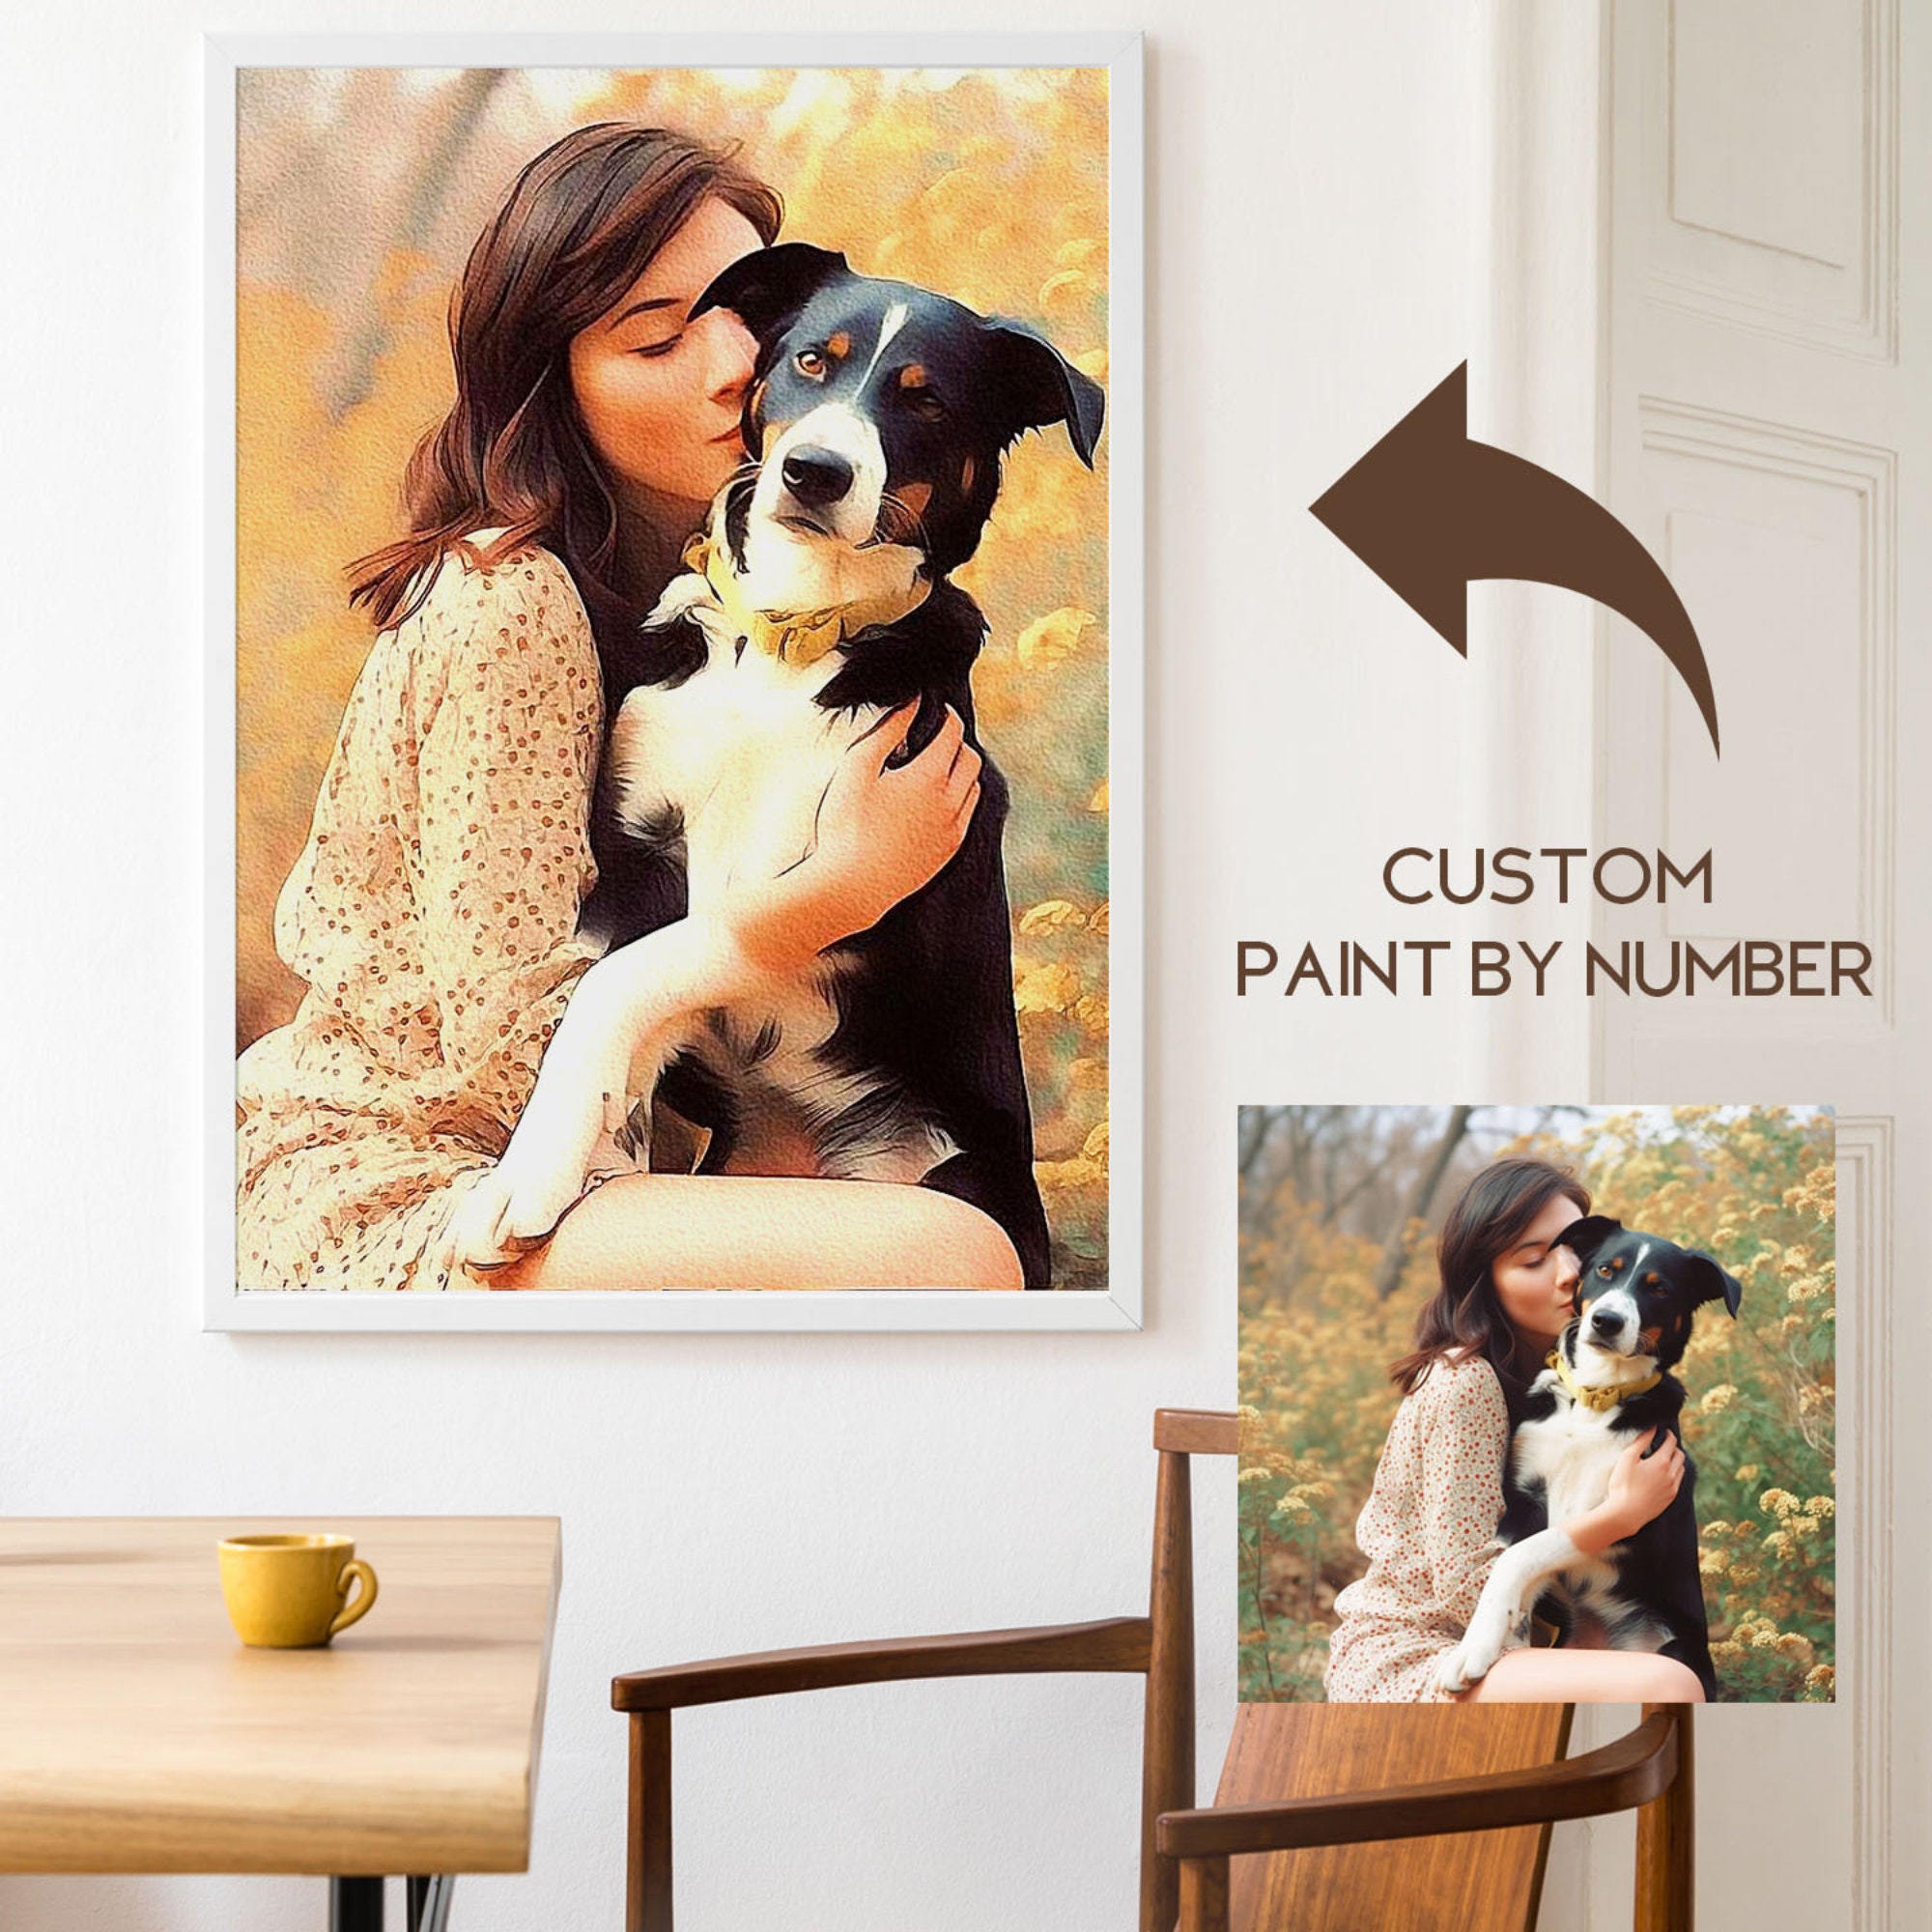 Custom Paint by Number | Personalized Photo